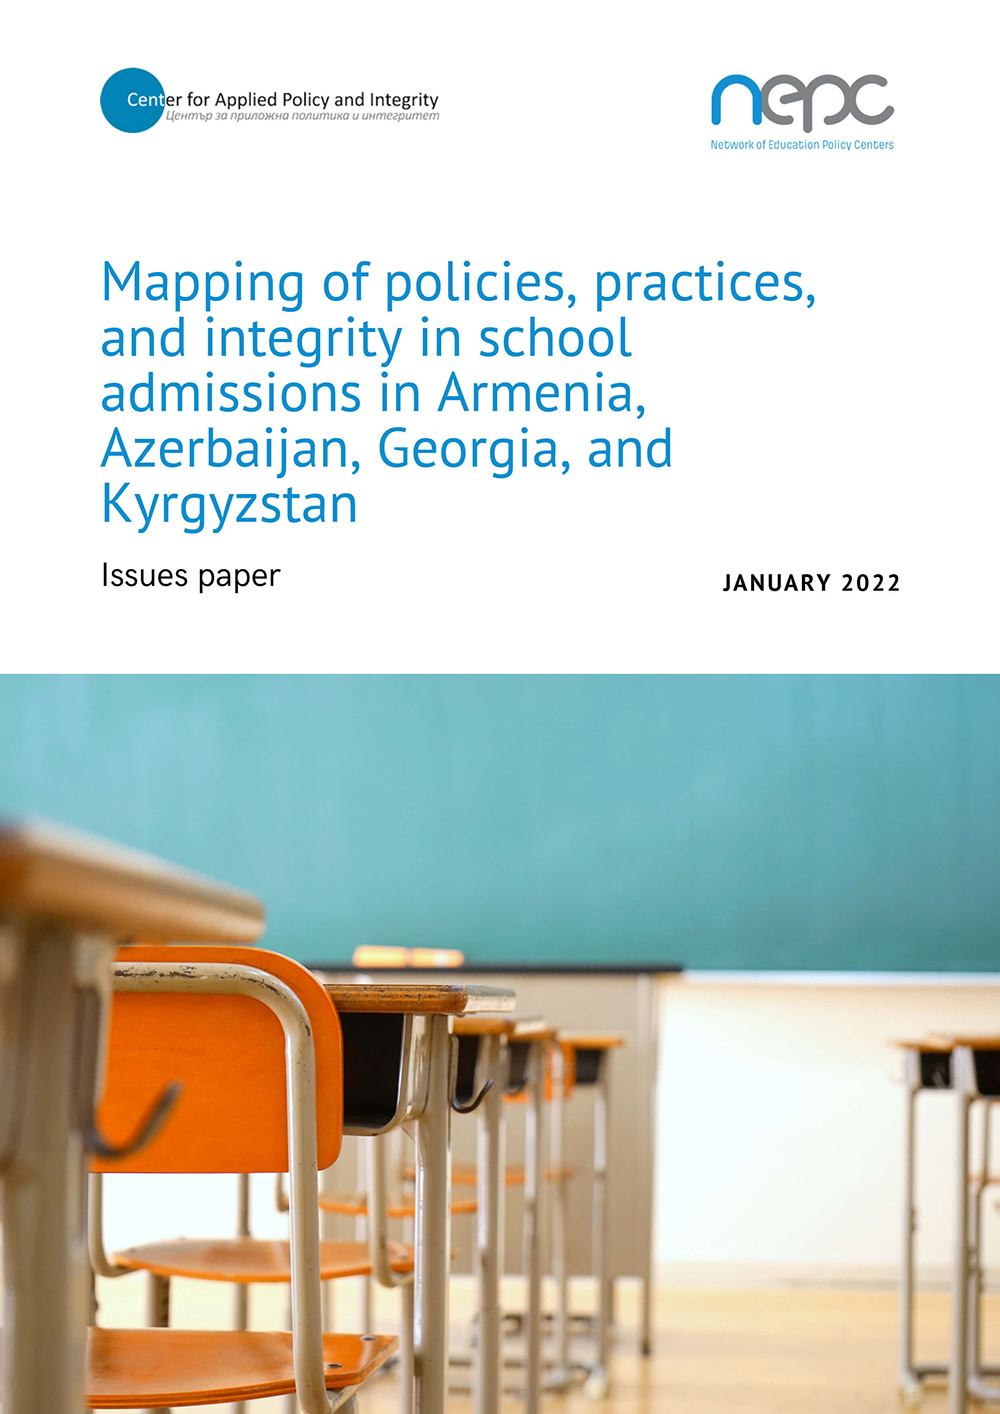 Mapping of policies, practices, and integrity in school admissions in Armenia, Azerbaijan, Georgia, and Kyrgyzstan